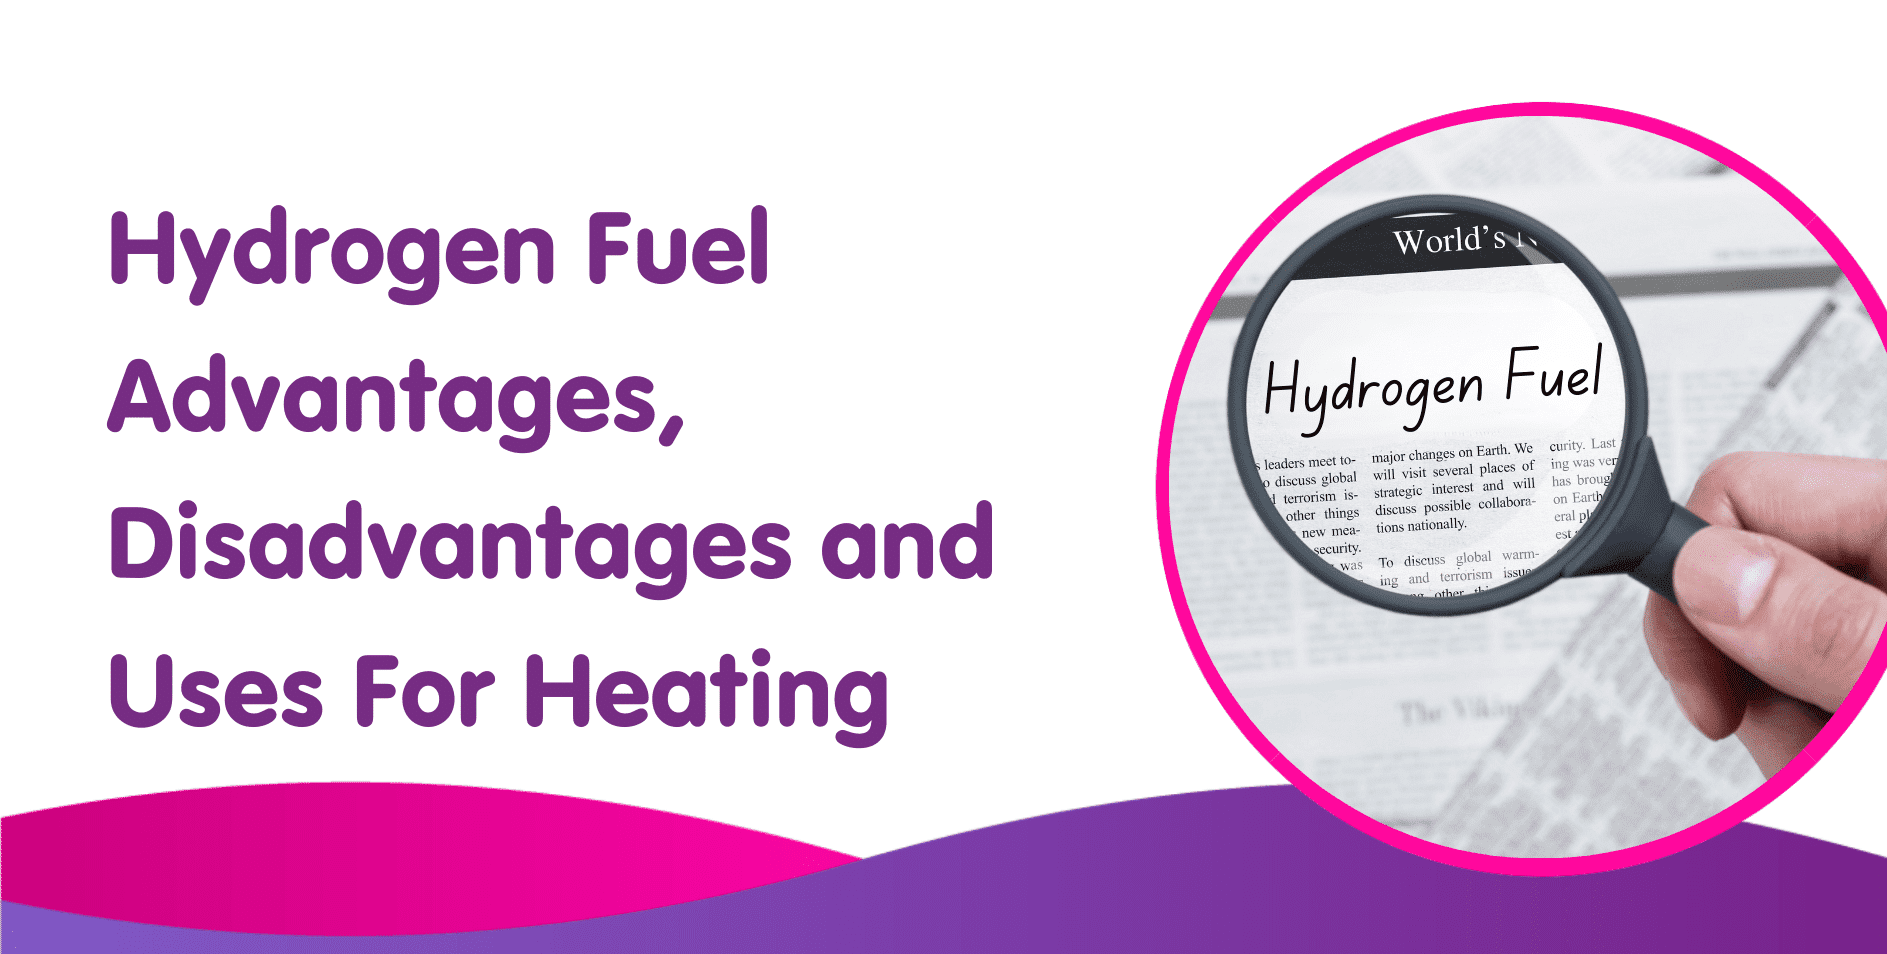 Hydrogen Fuel Advantages, Disadvantages and Uses For Heating